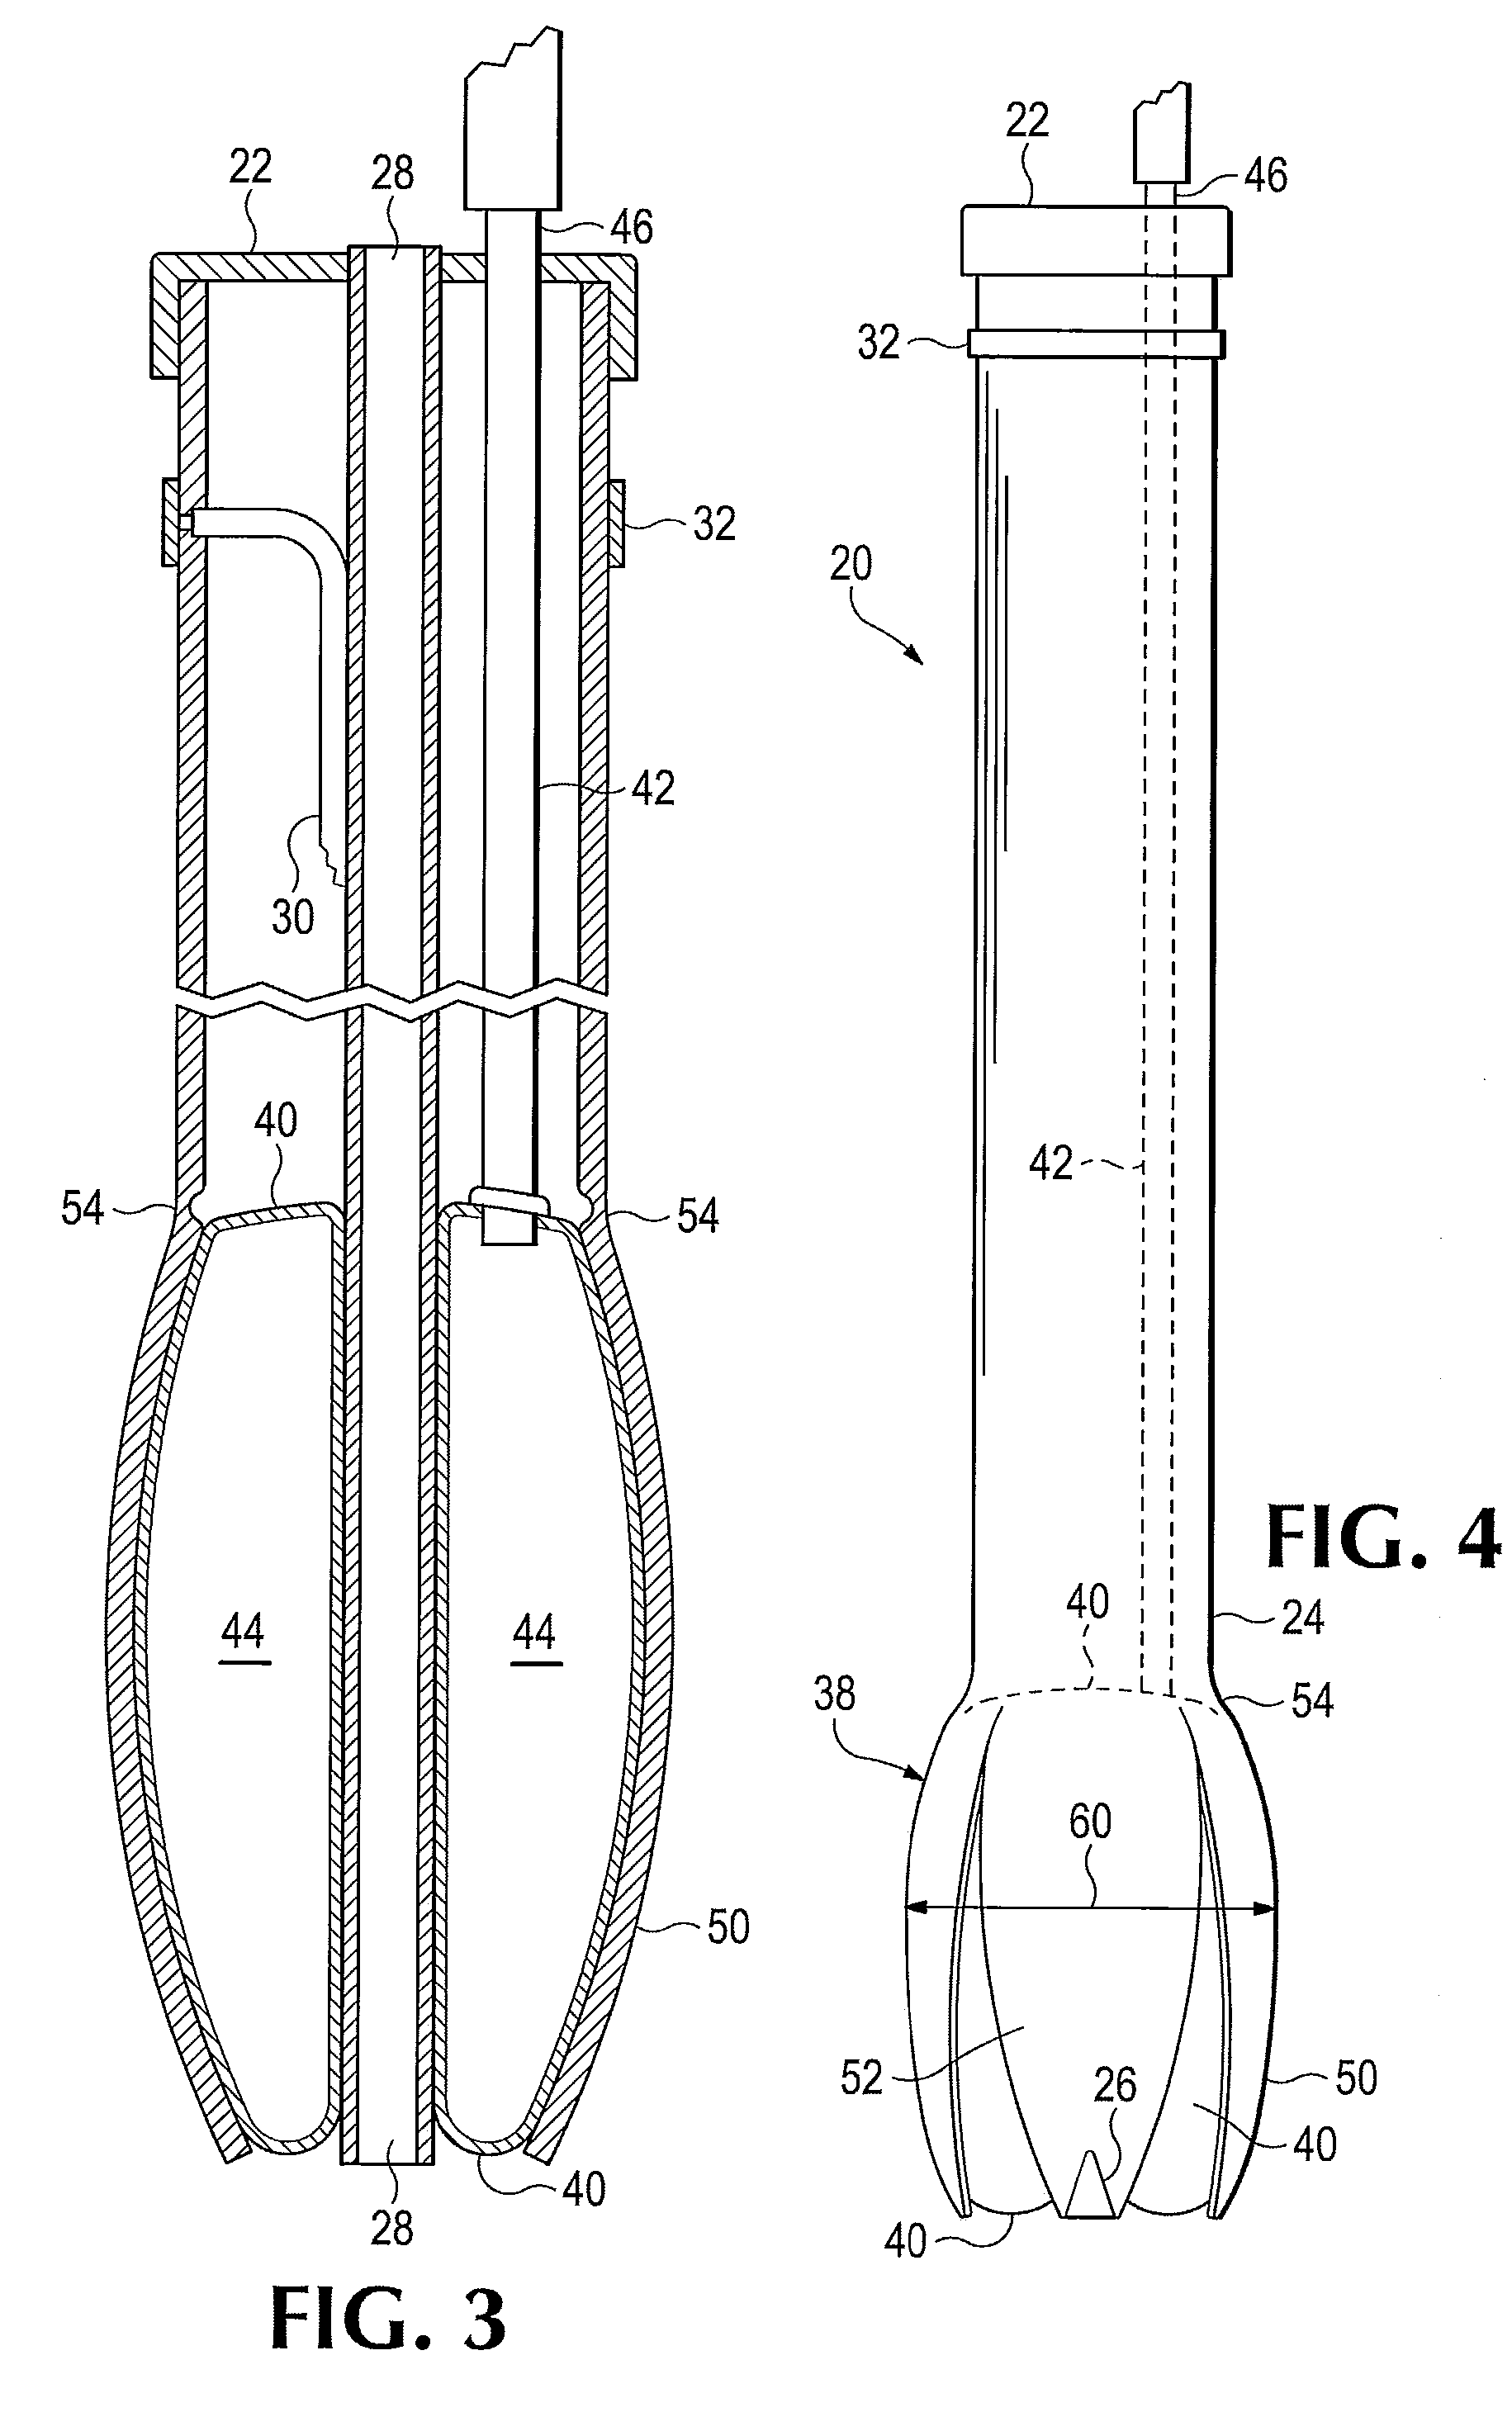 Surgical probe incorporating a dilator